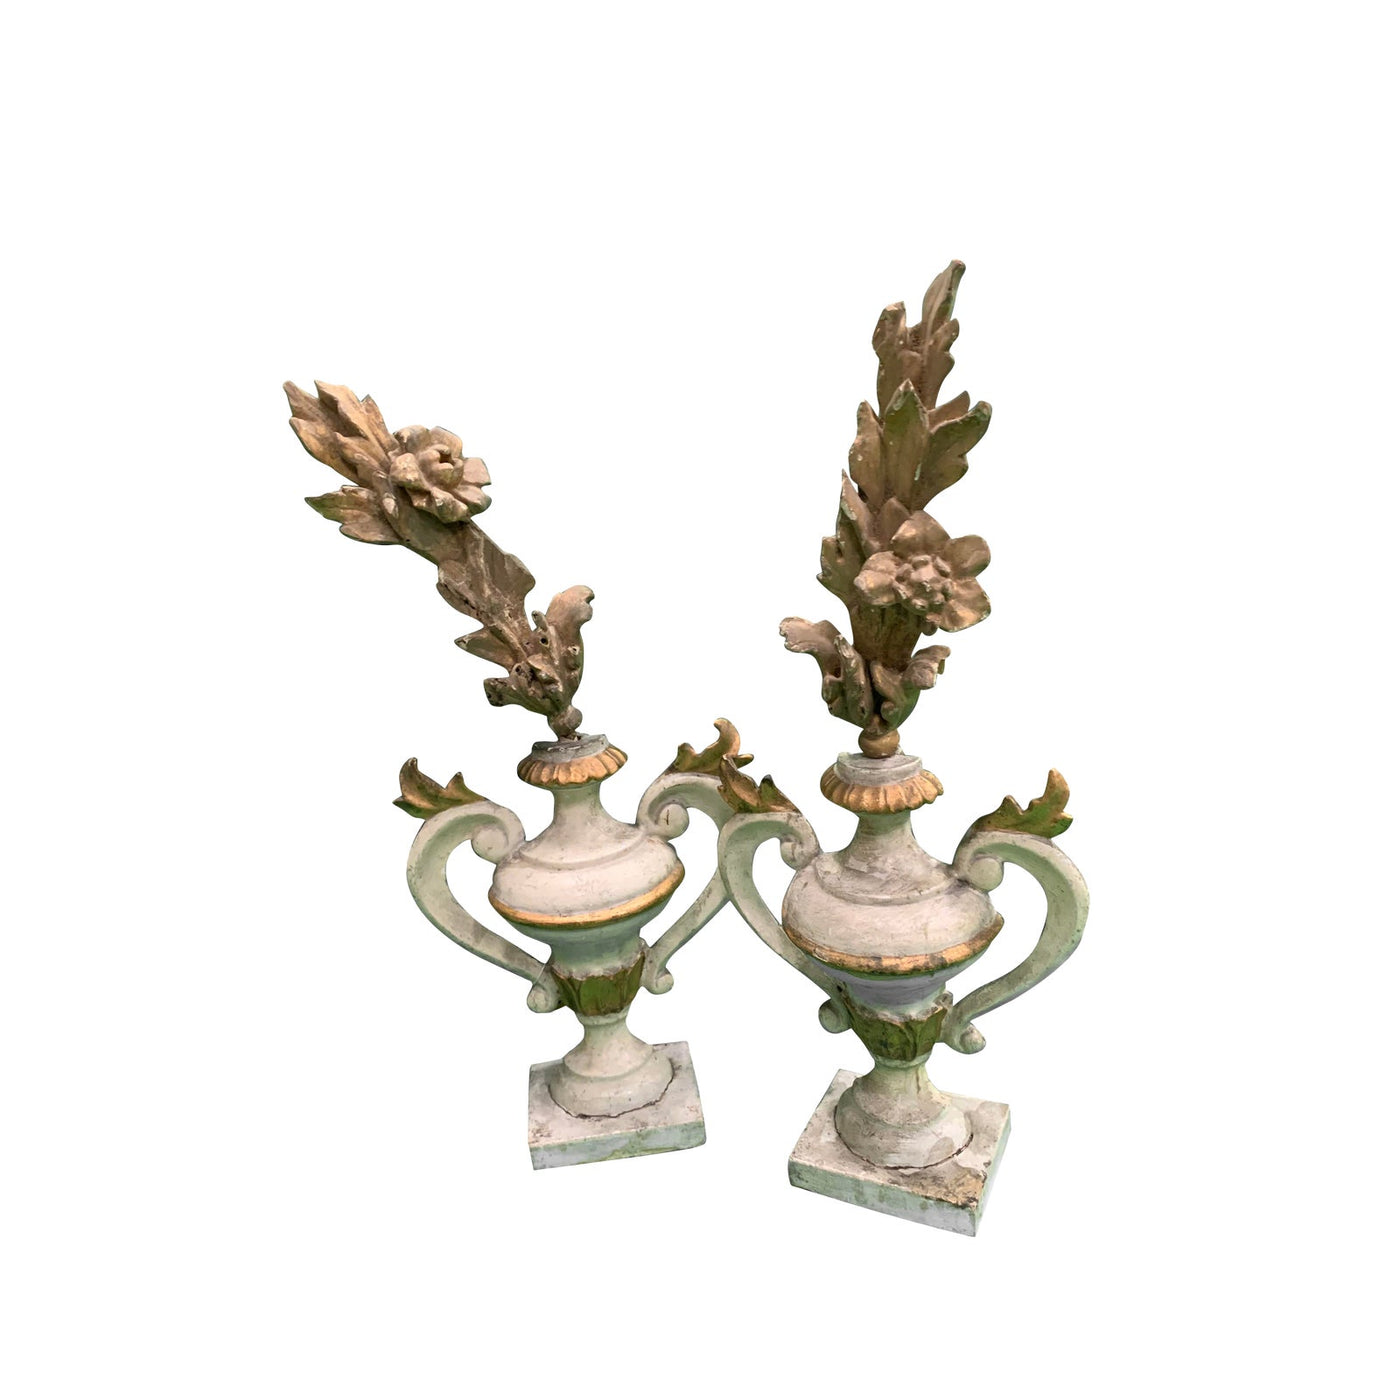 18th Century Tuscan Urn Fragments- A Pair